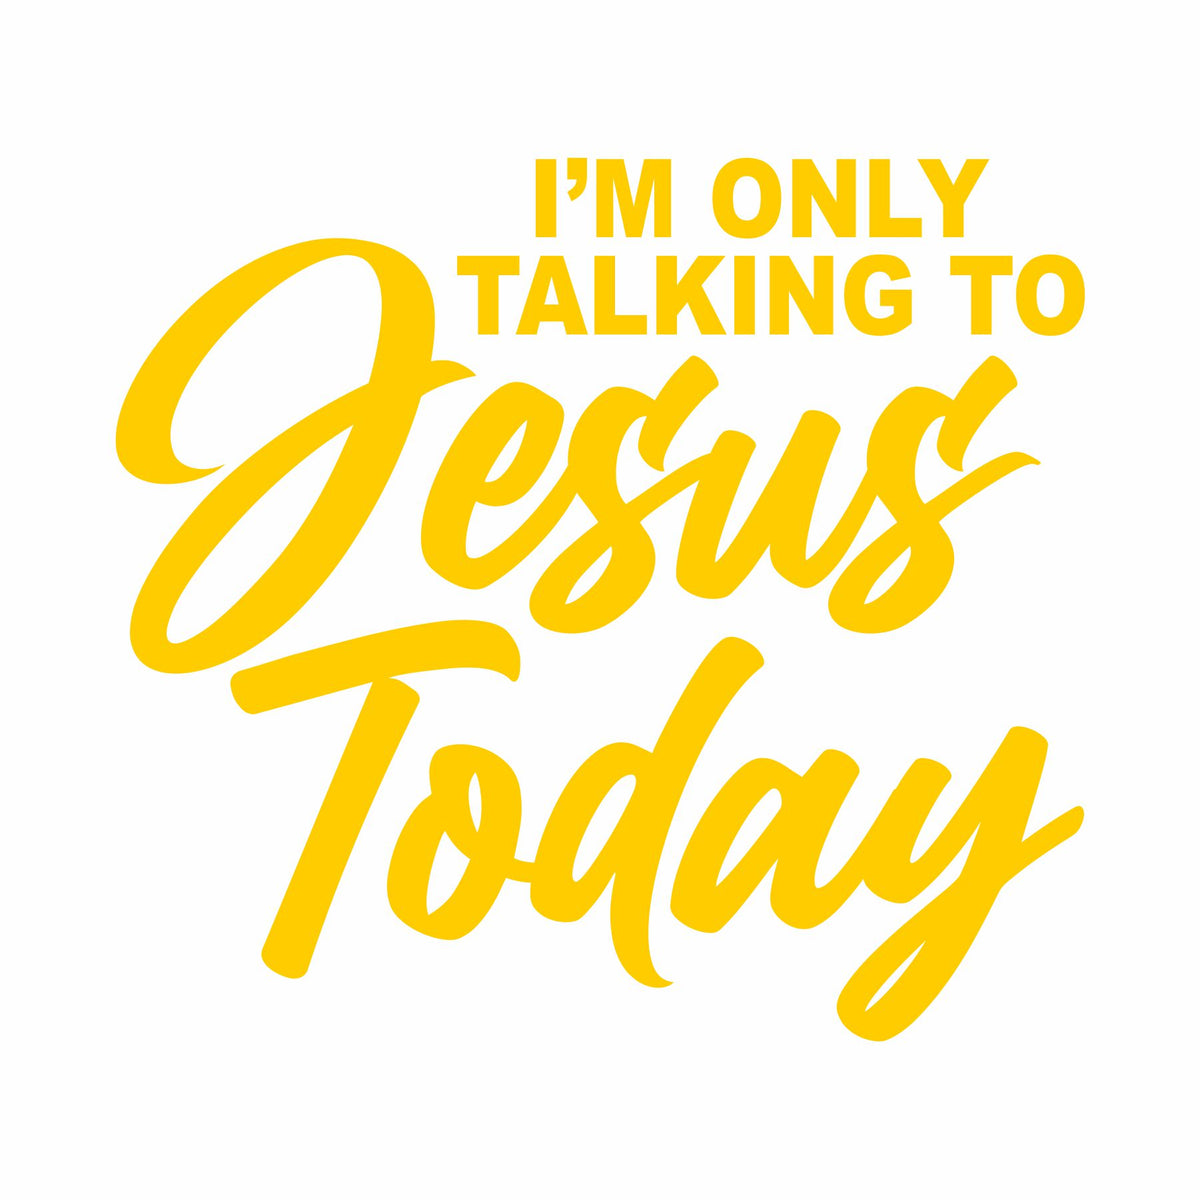 I'm Only Talking to Jesus Today - Vinyl Decal - Free Shipping